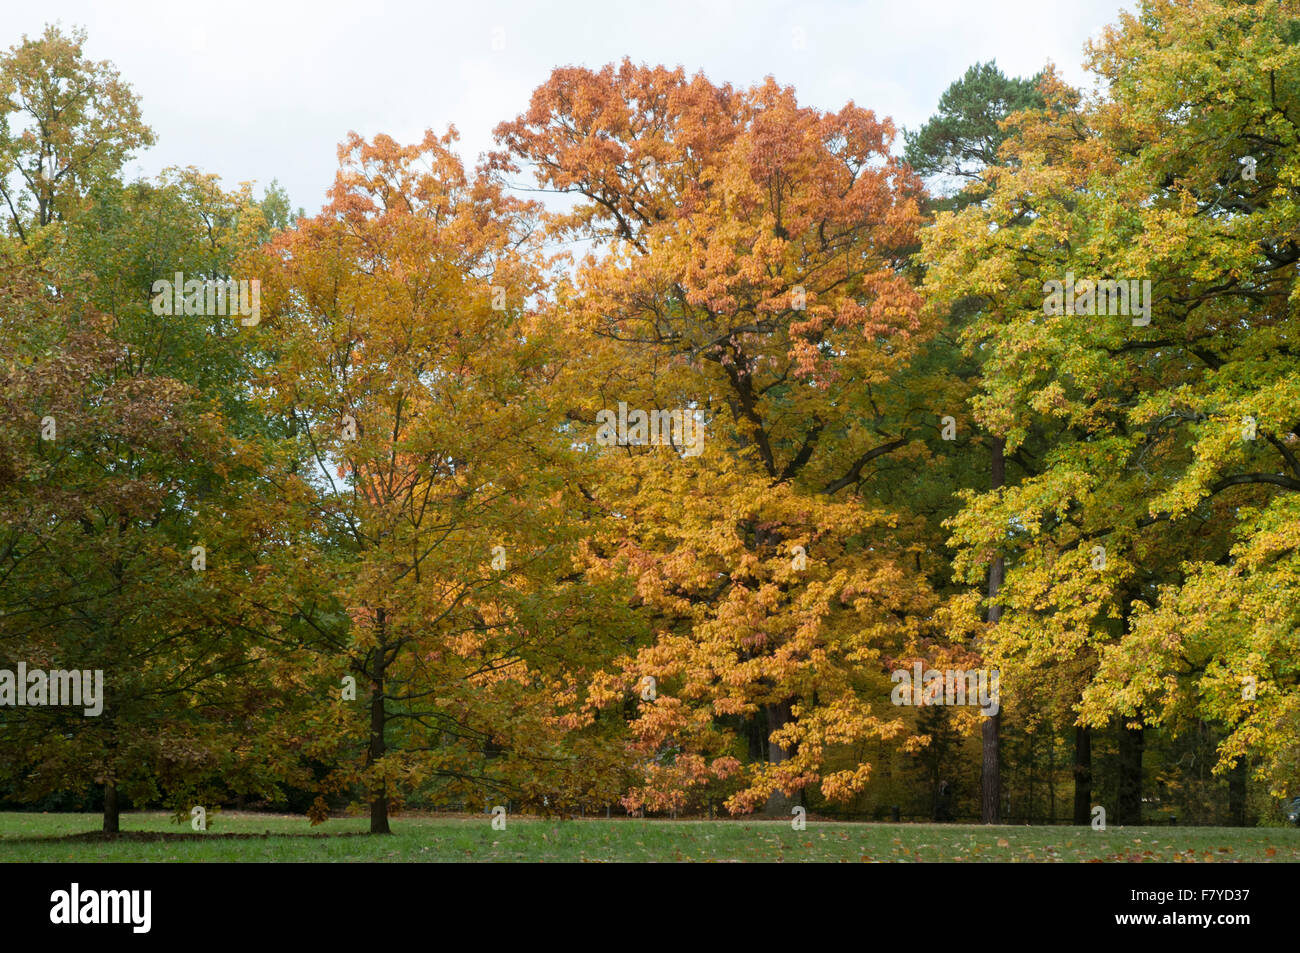 Autumn or Fall colours in the Neuer Garten park at Potsdam, Germany Stock Photo